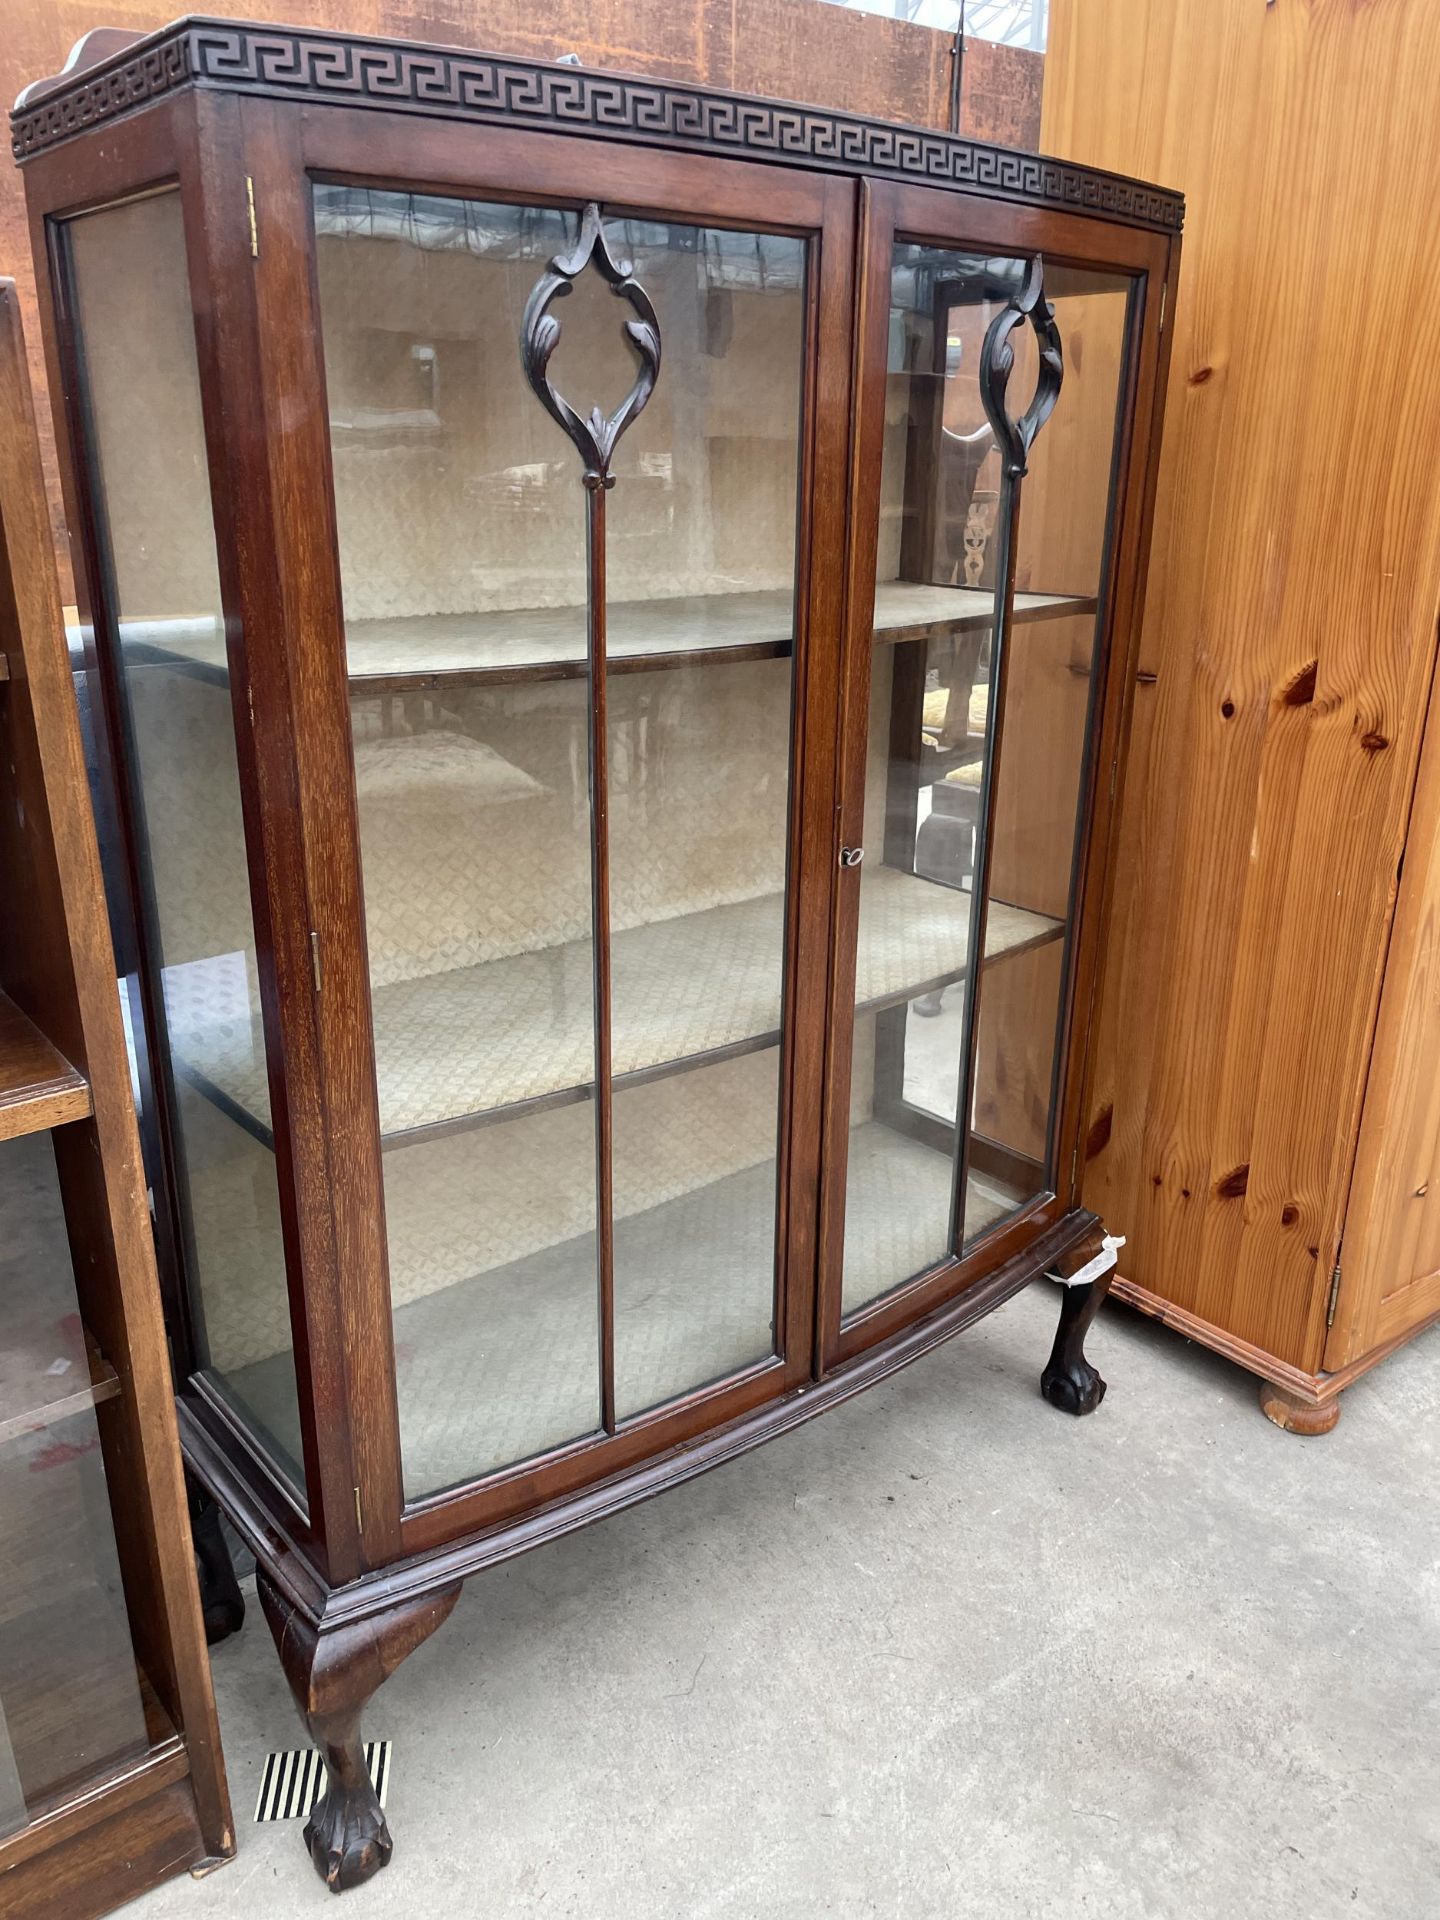 AN EARLY 20TH CENTURY MAHOGANY TWO DOOR GLASS DISPLAY CABINET WITH GREEK KEY CARVING, ON CABRIOLE - Image 2 of 4